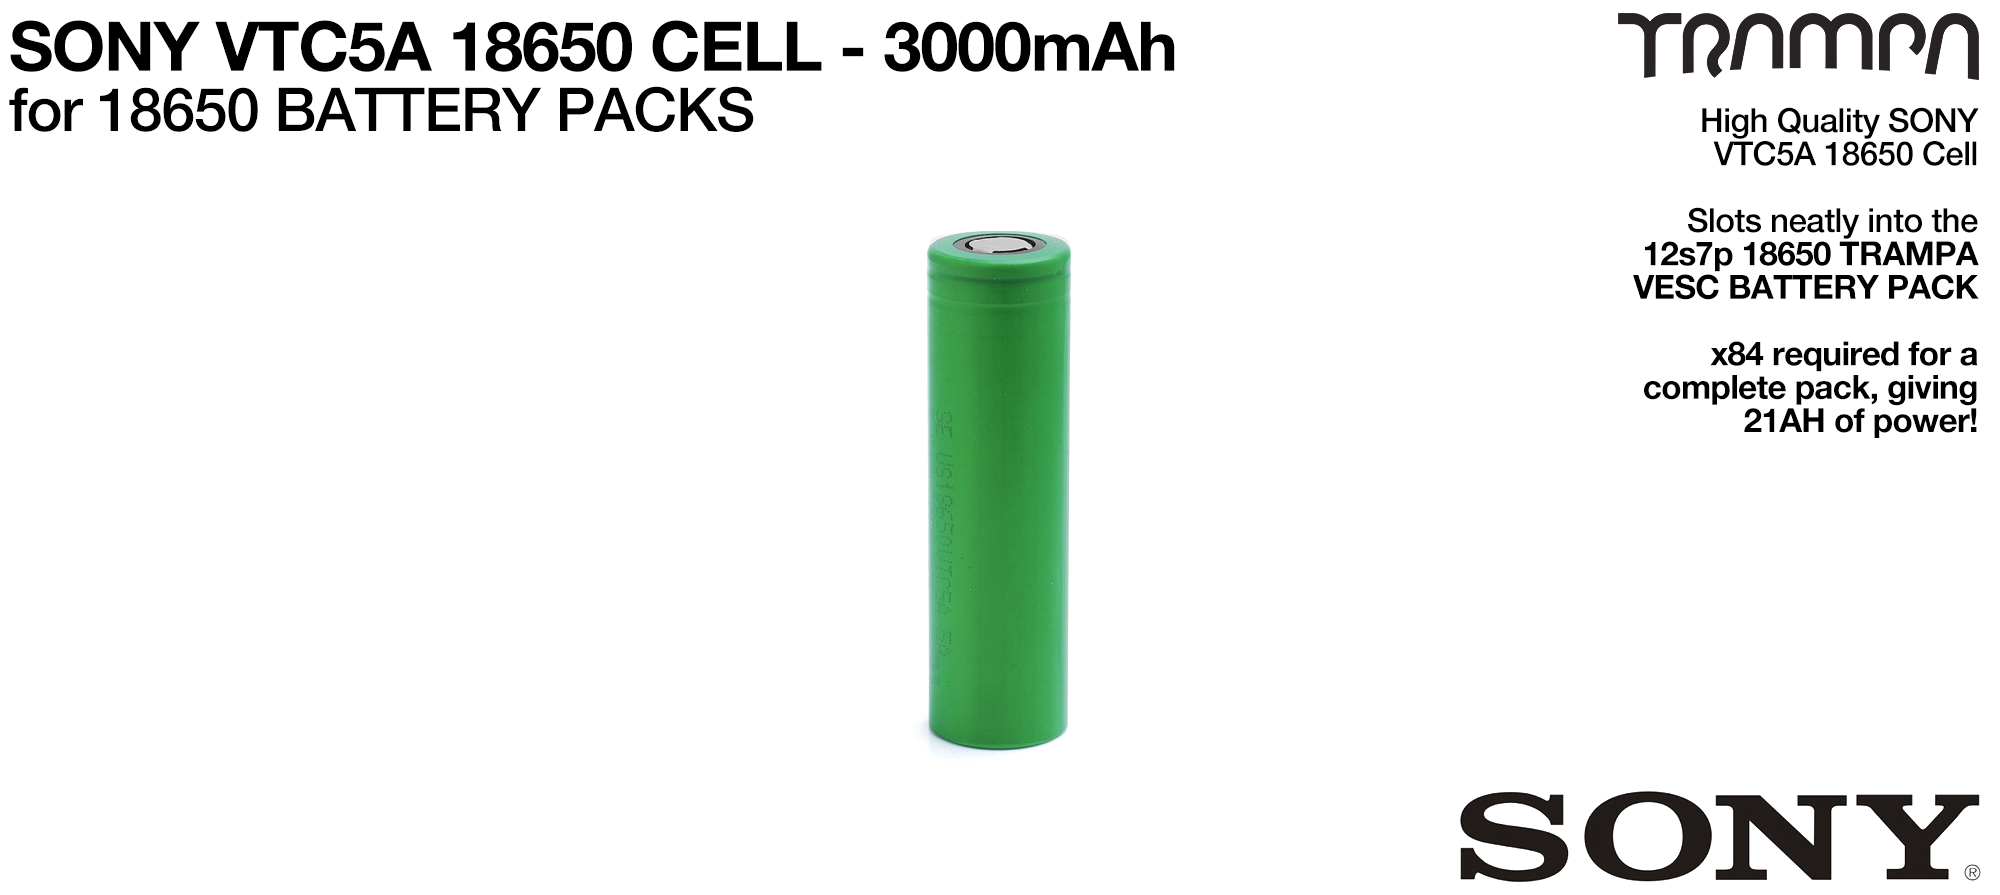 SONY VTC5A 18650 Cells 3000mAh - UK CUSTOMERS ONLY